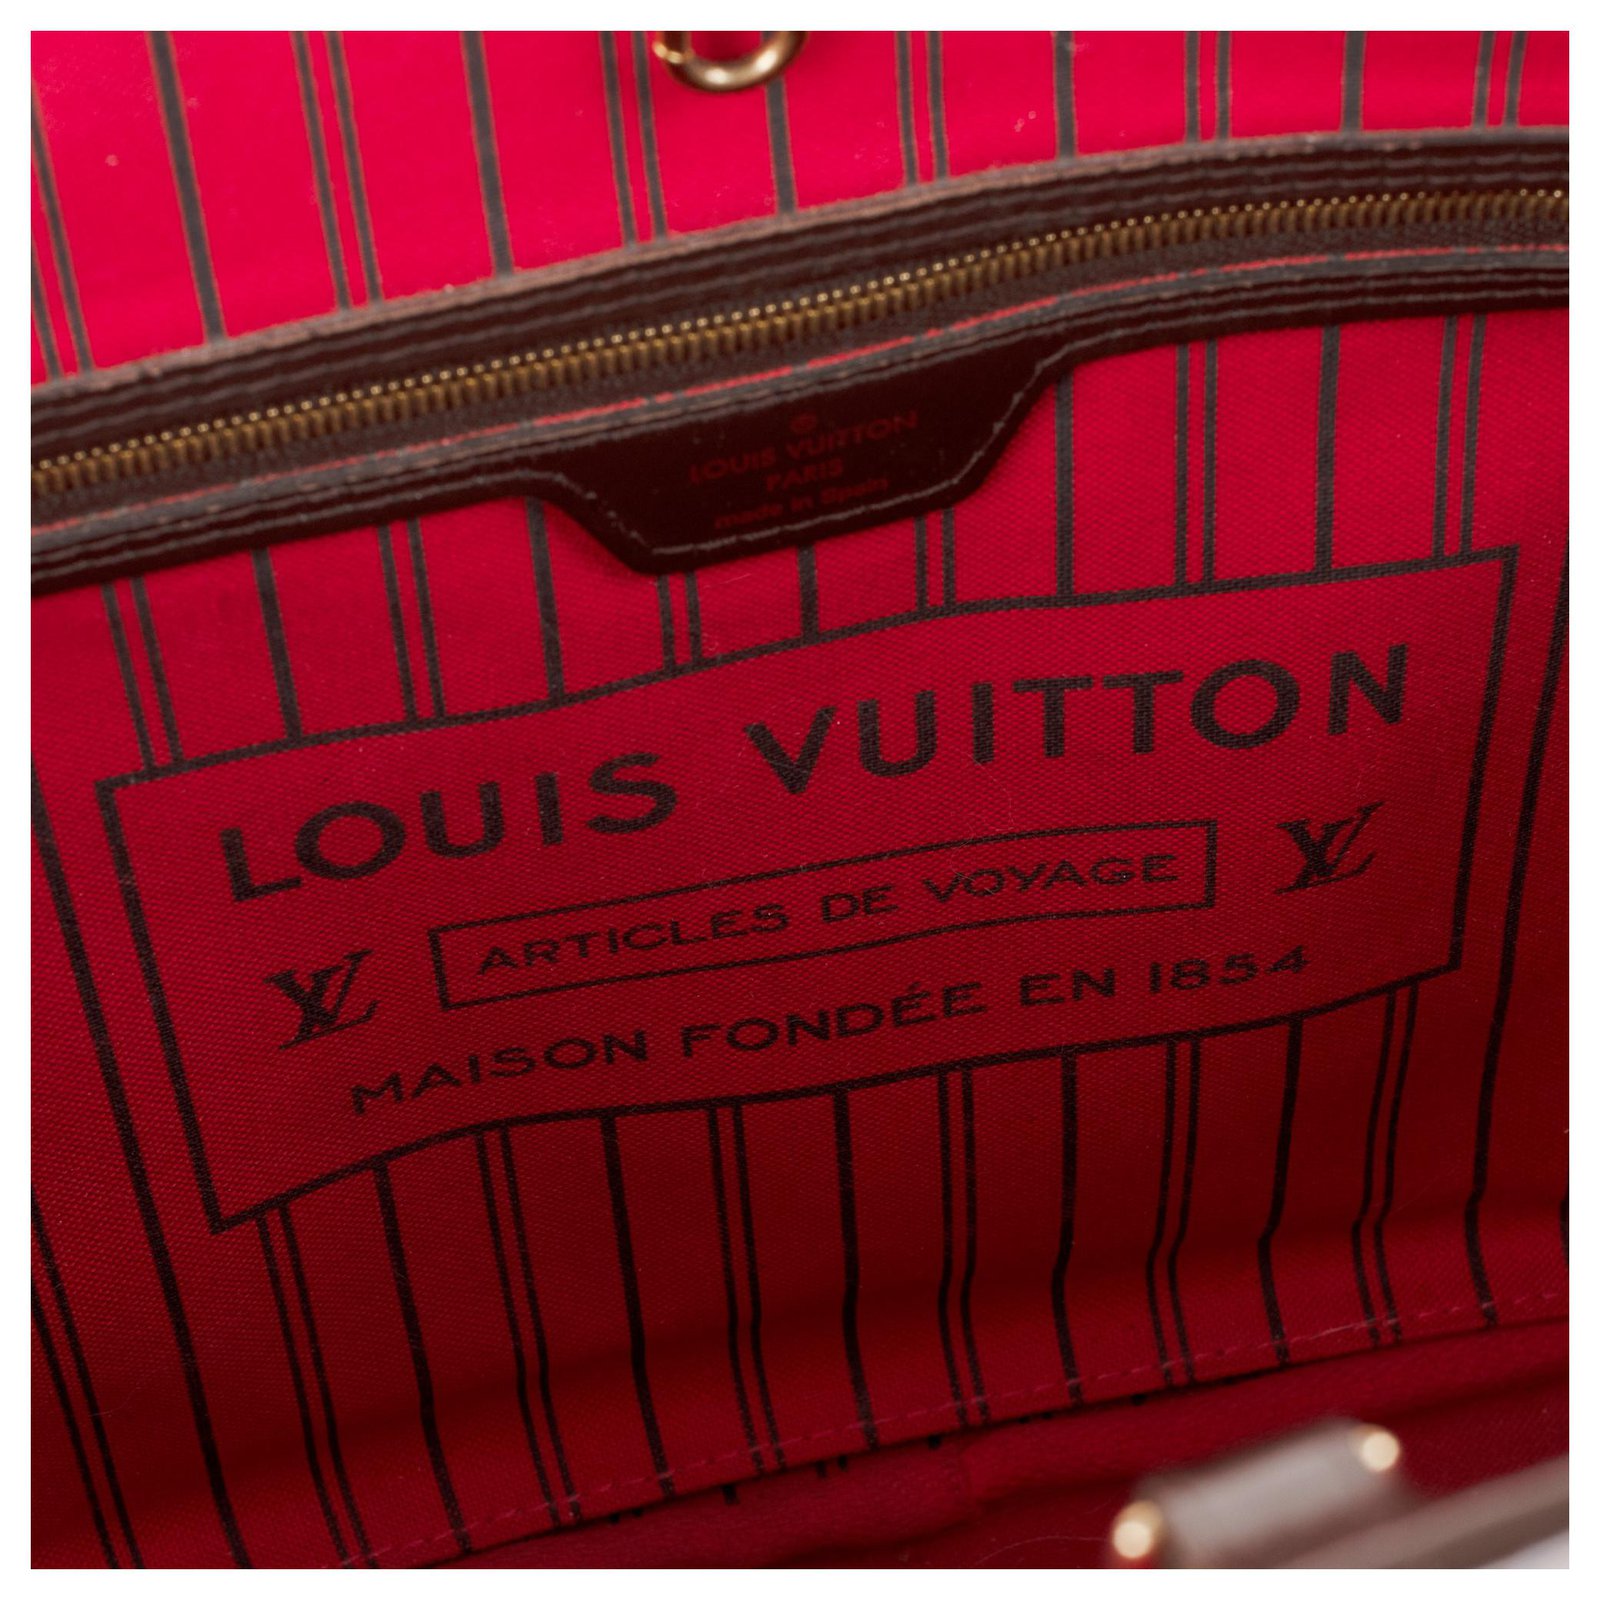 Stunning Louis Vuitton Neverfull MM Checkered Ebony Tote Bag Customized by  the artist PatBo! Brown Pink Leather Cloth ref.145405 - Joli Closet